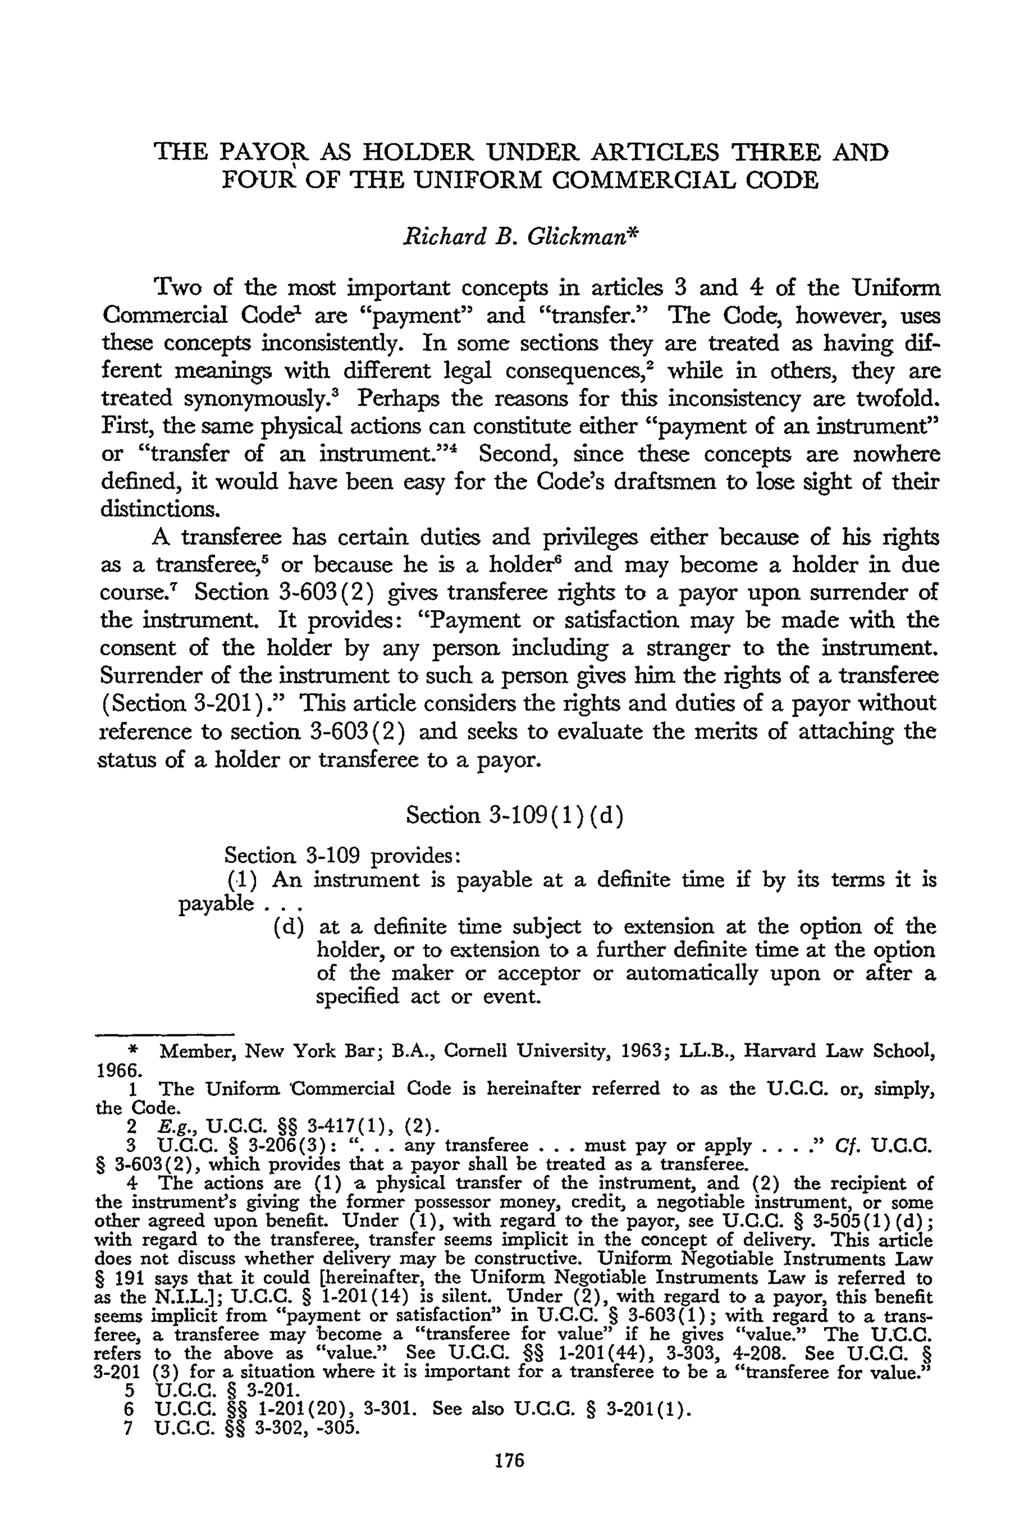 THE PAYOR AS HOLDER UNDER ARTICLES THREE AND FOUR OF THE UNIFORM COMMERCIAL CODE Richard B.